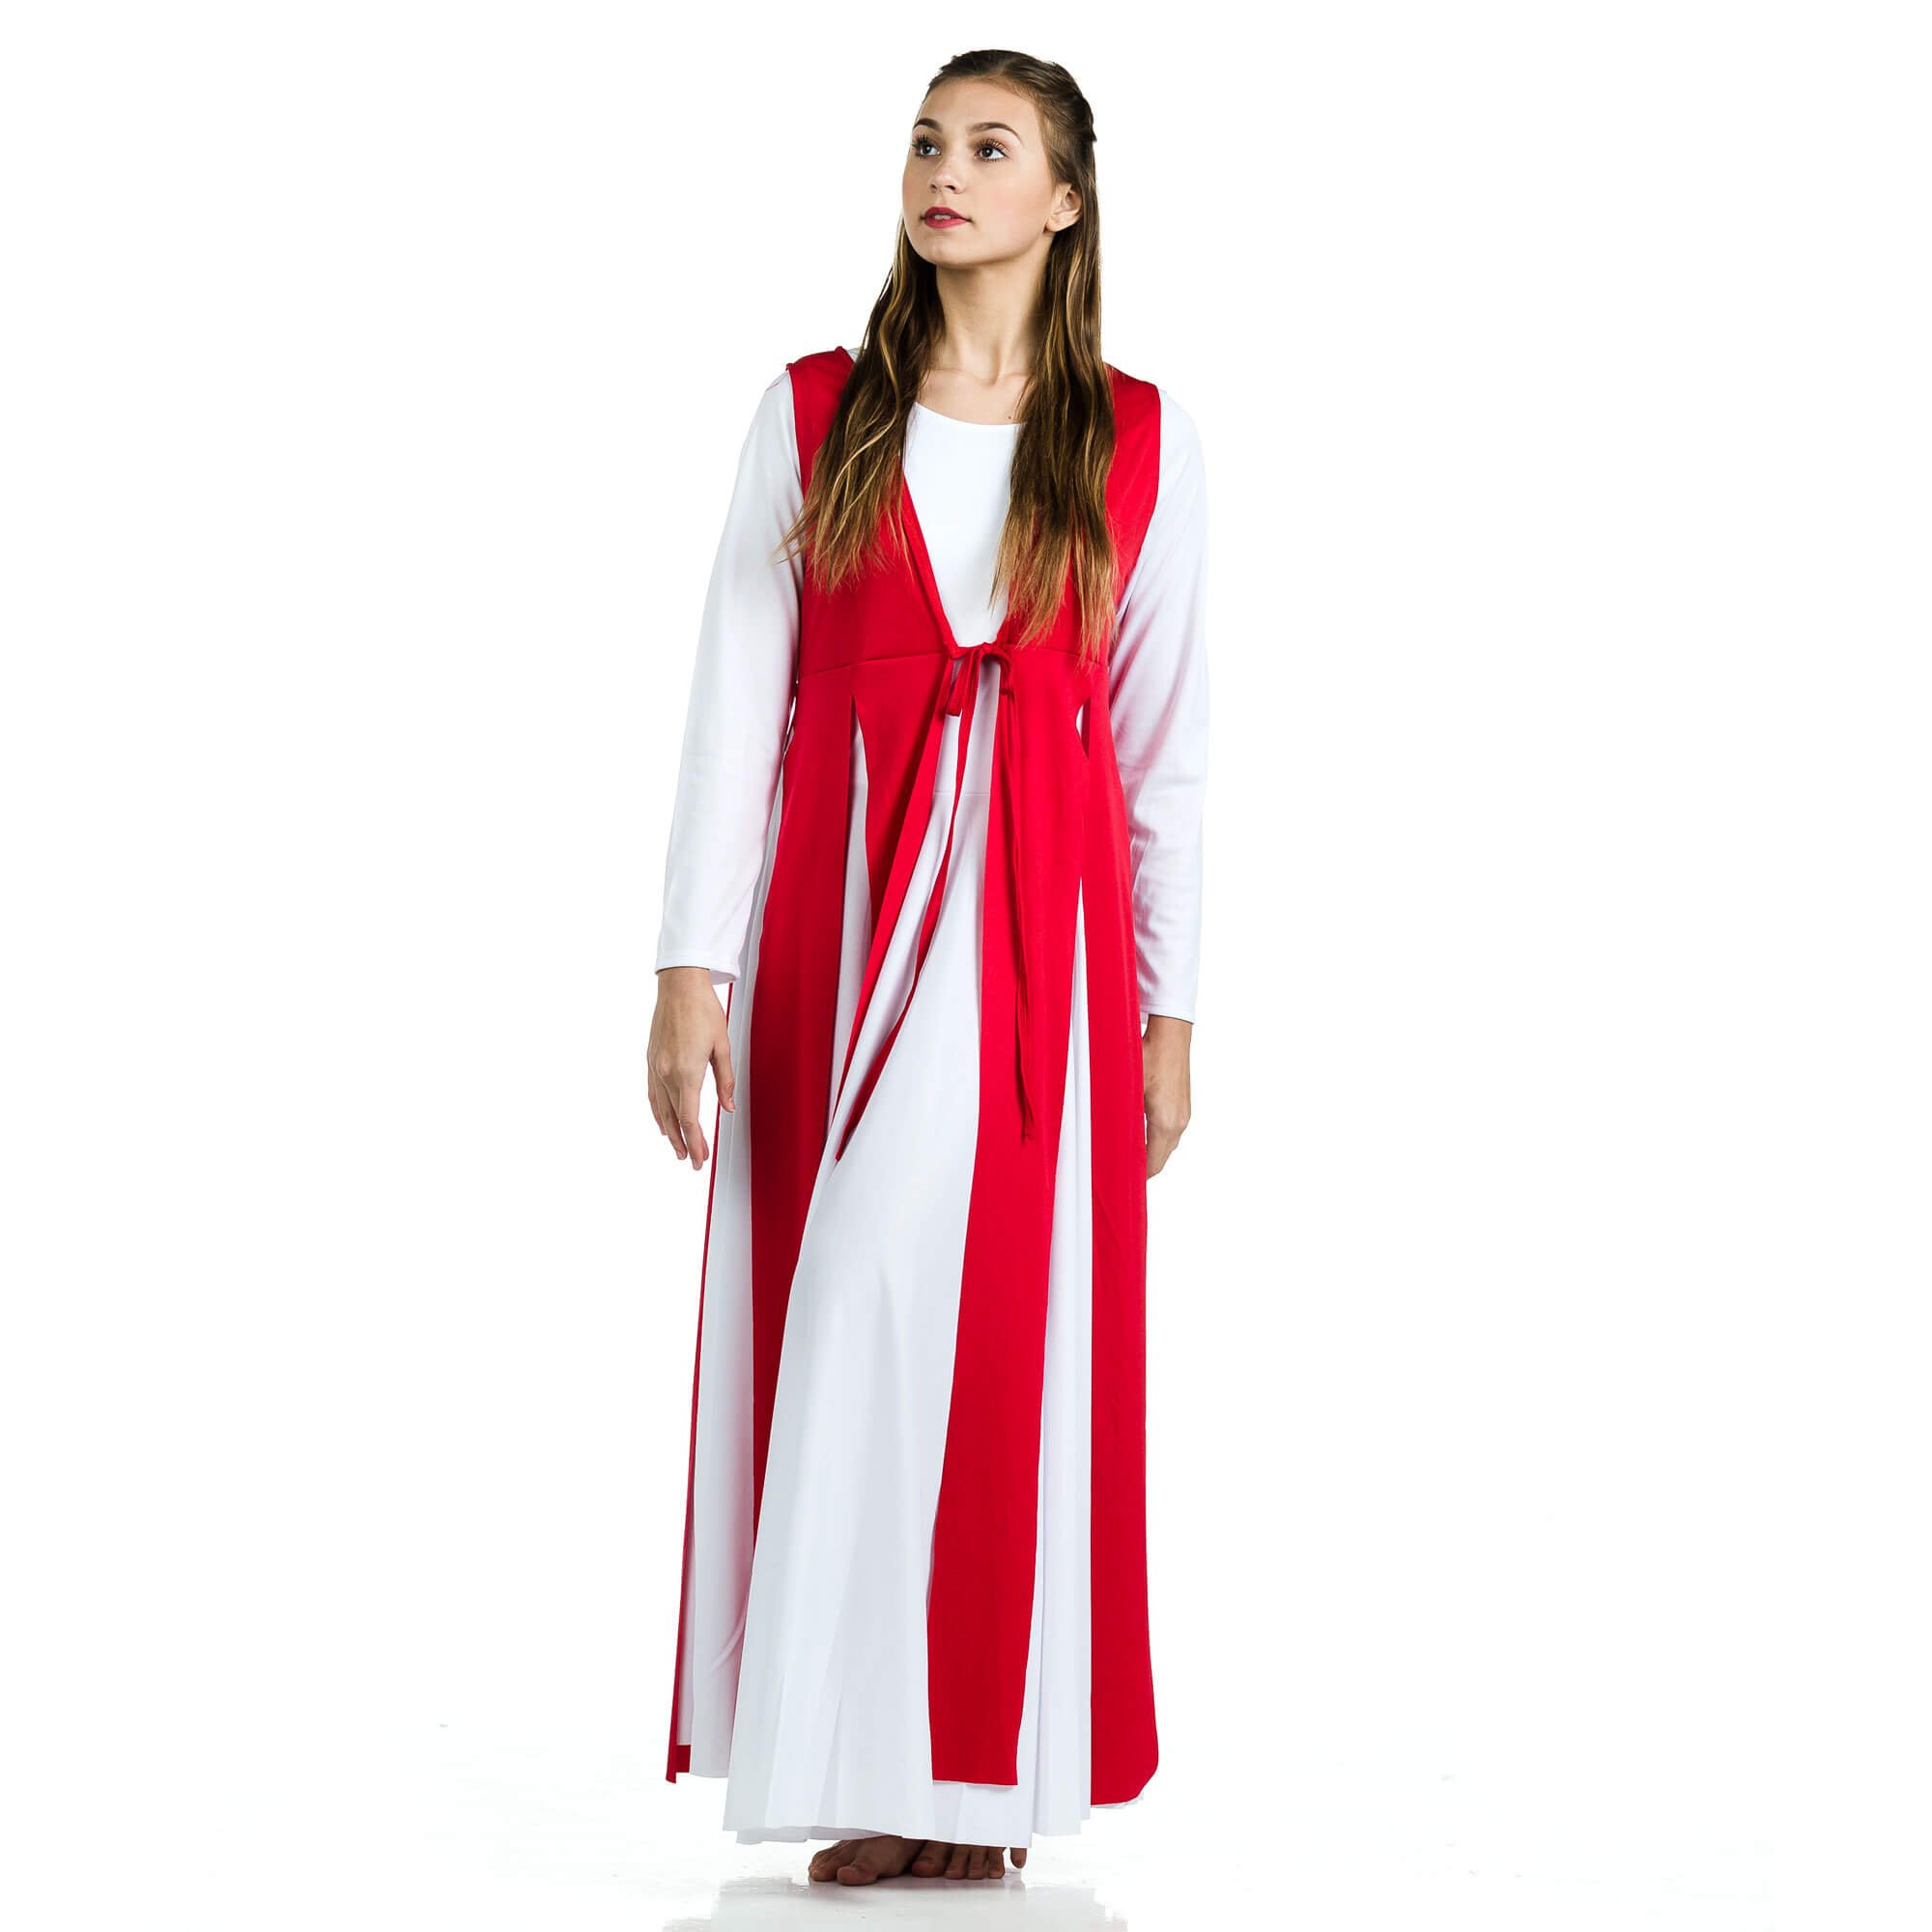 Danzcue Worship Dance Streamer Tunic (Dress not Included) - Click Image to Close